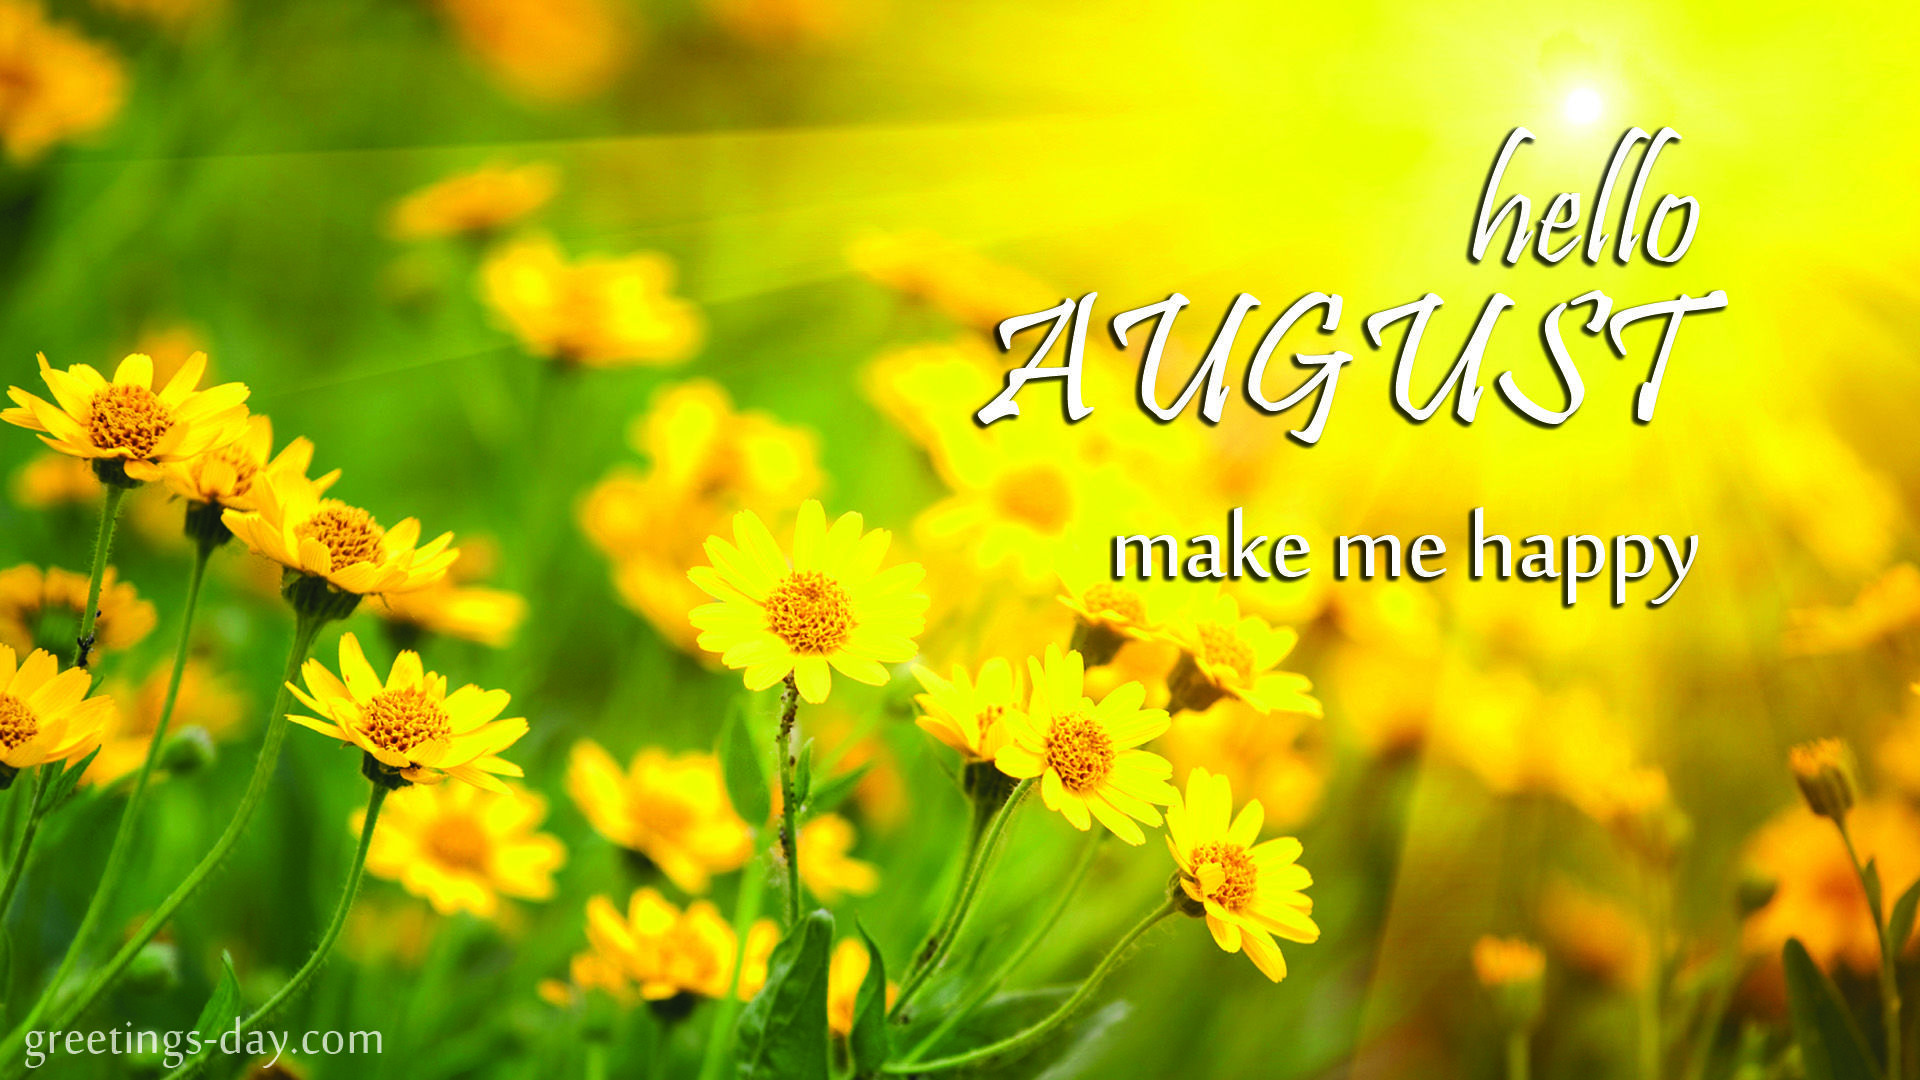 Hello August Images Wallpapers